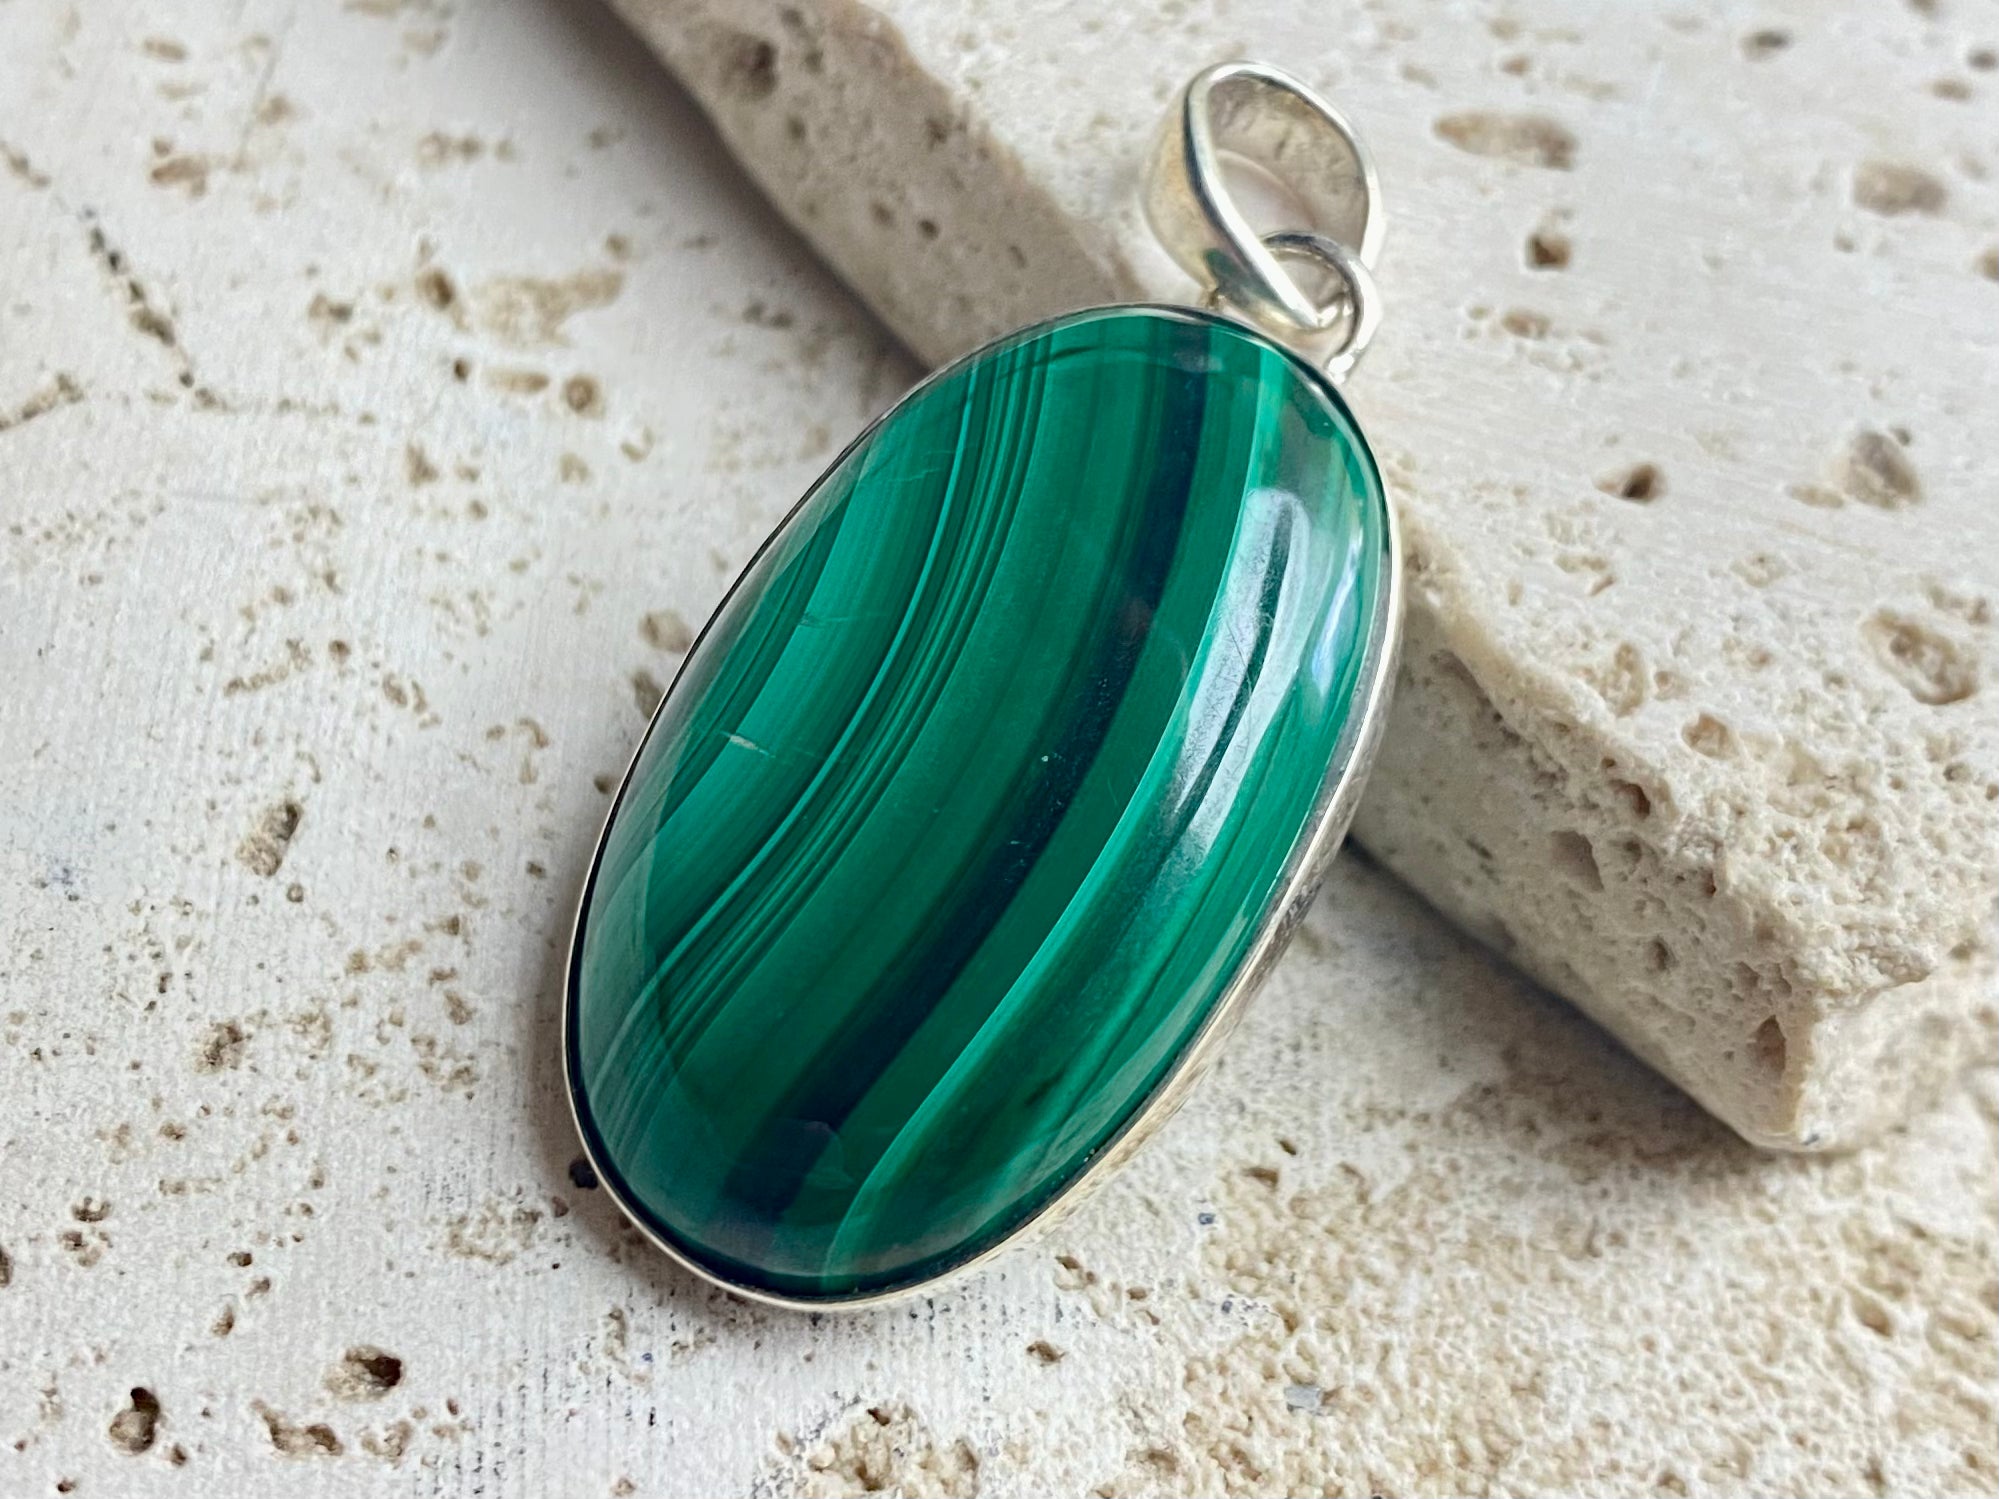 Oval malachite stone pendant set in sterling silver bezel surround, and large bail